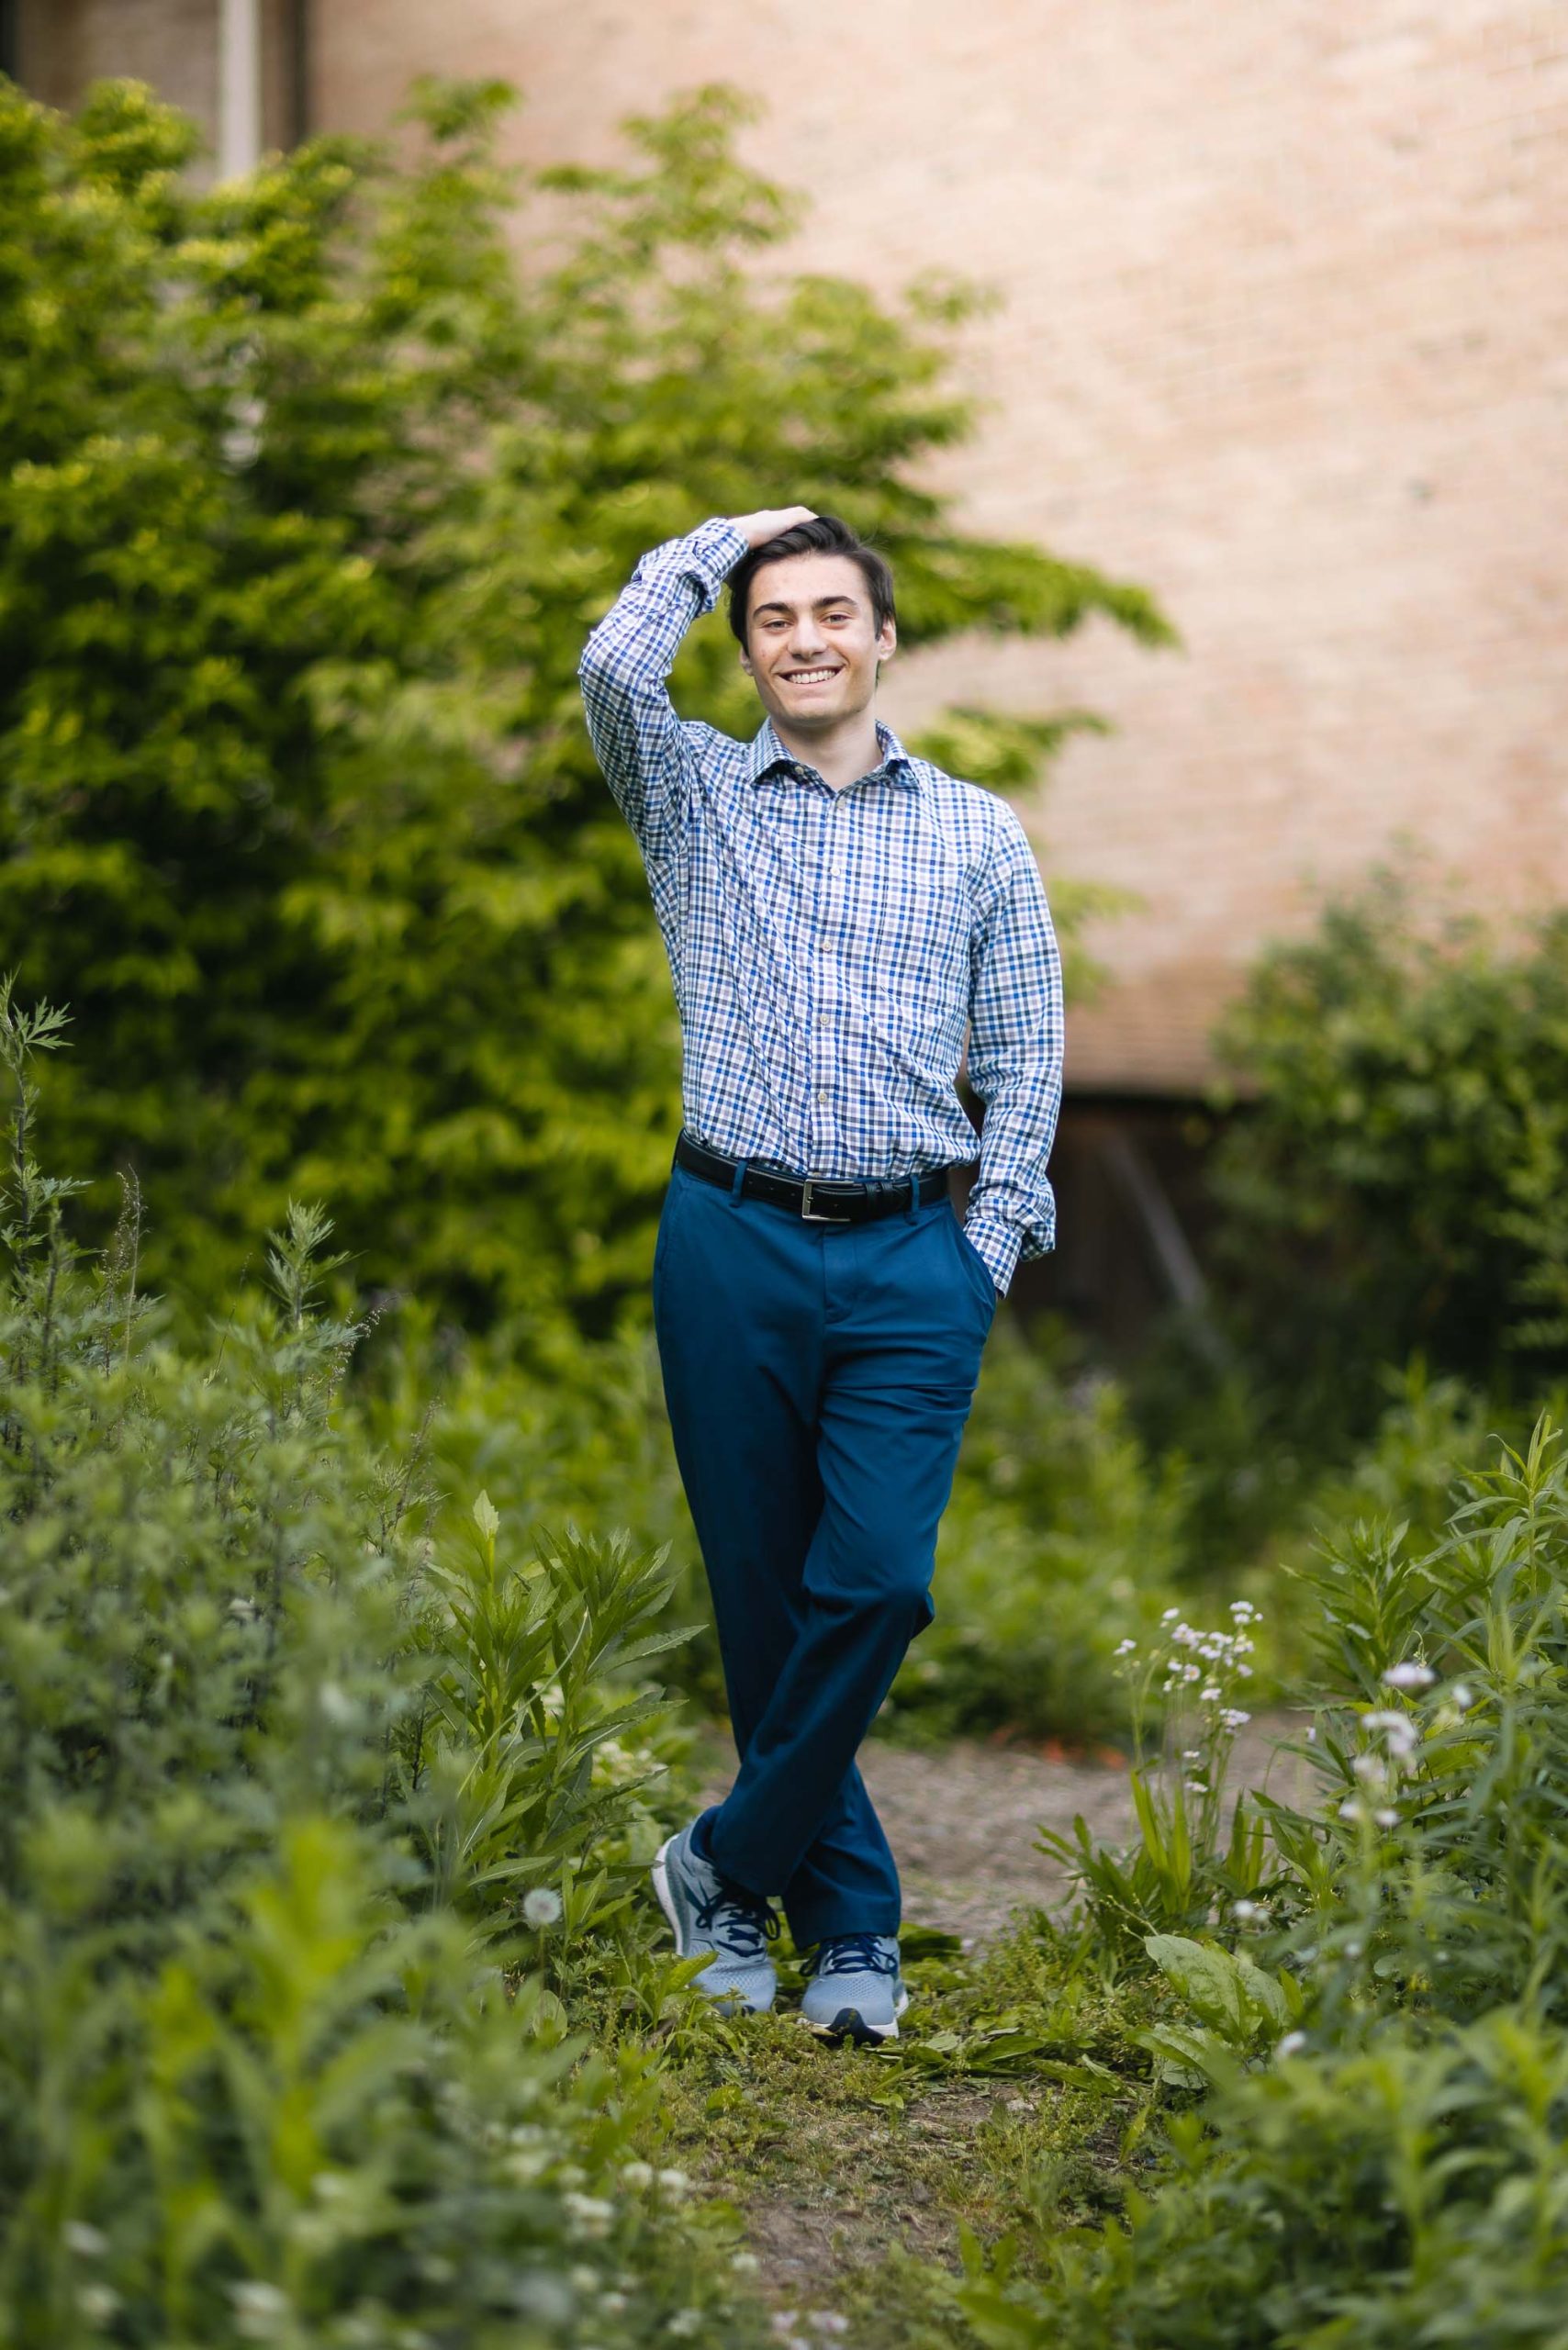 A senior man standing in a grassy area.